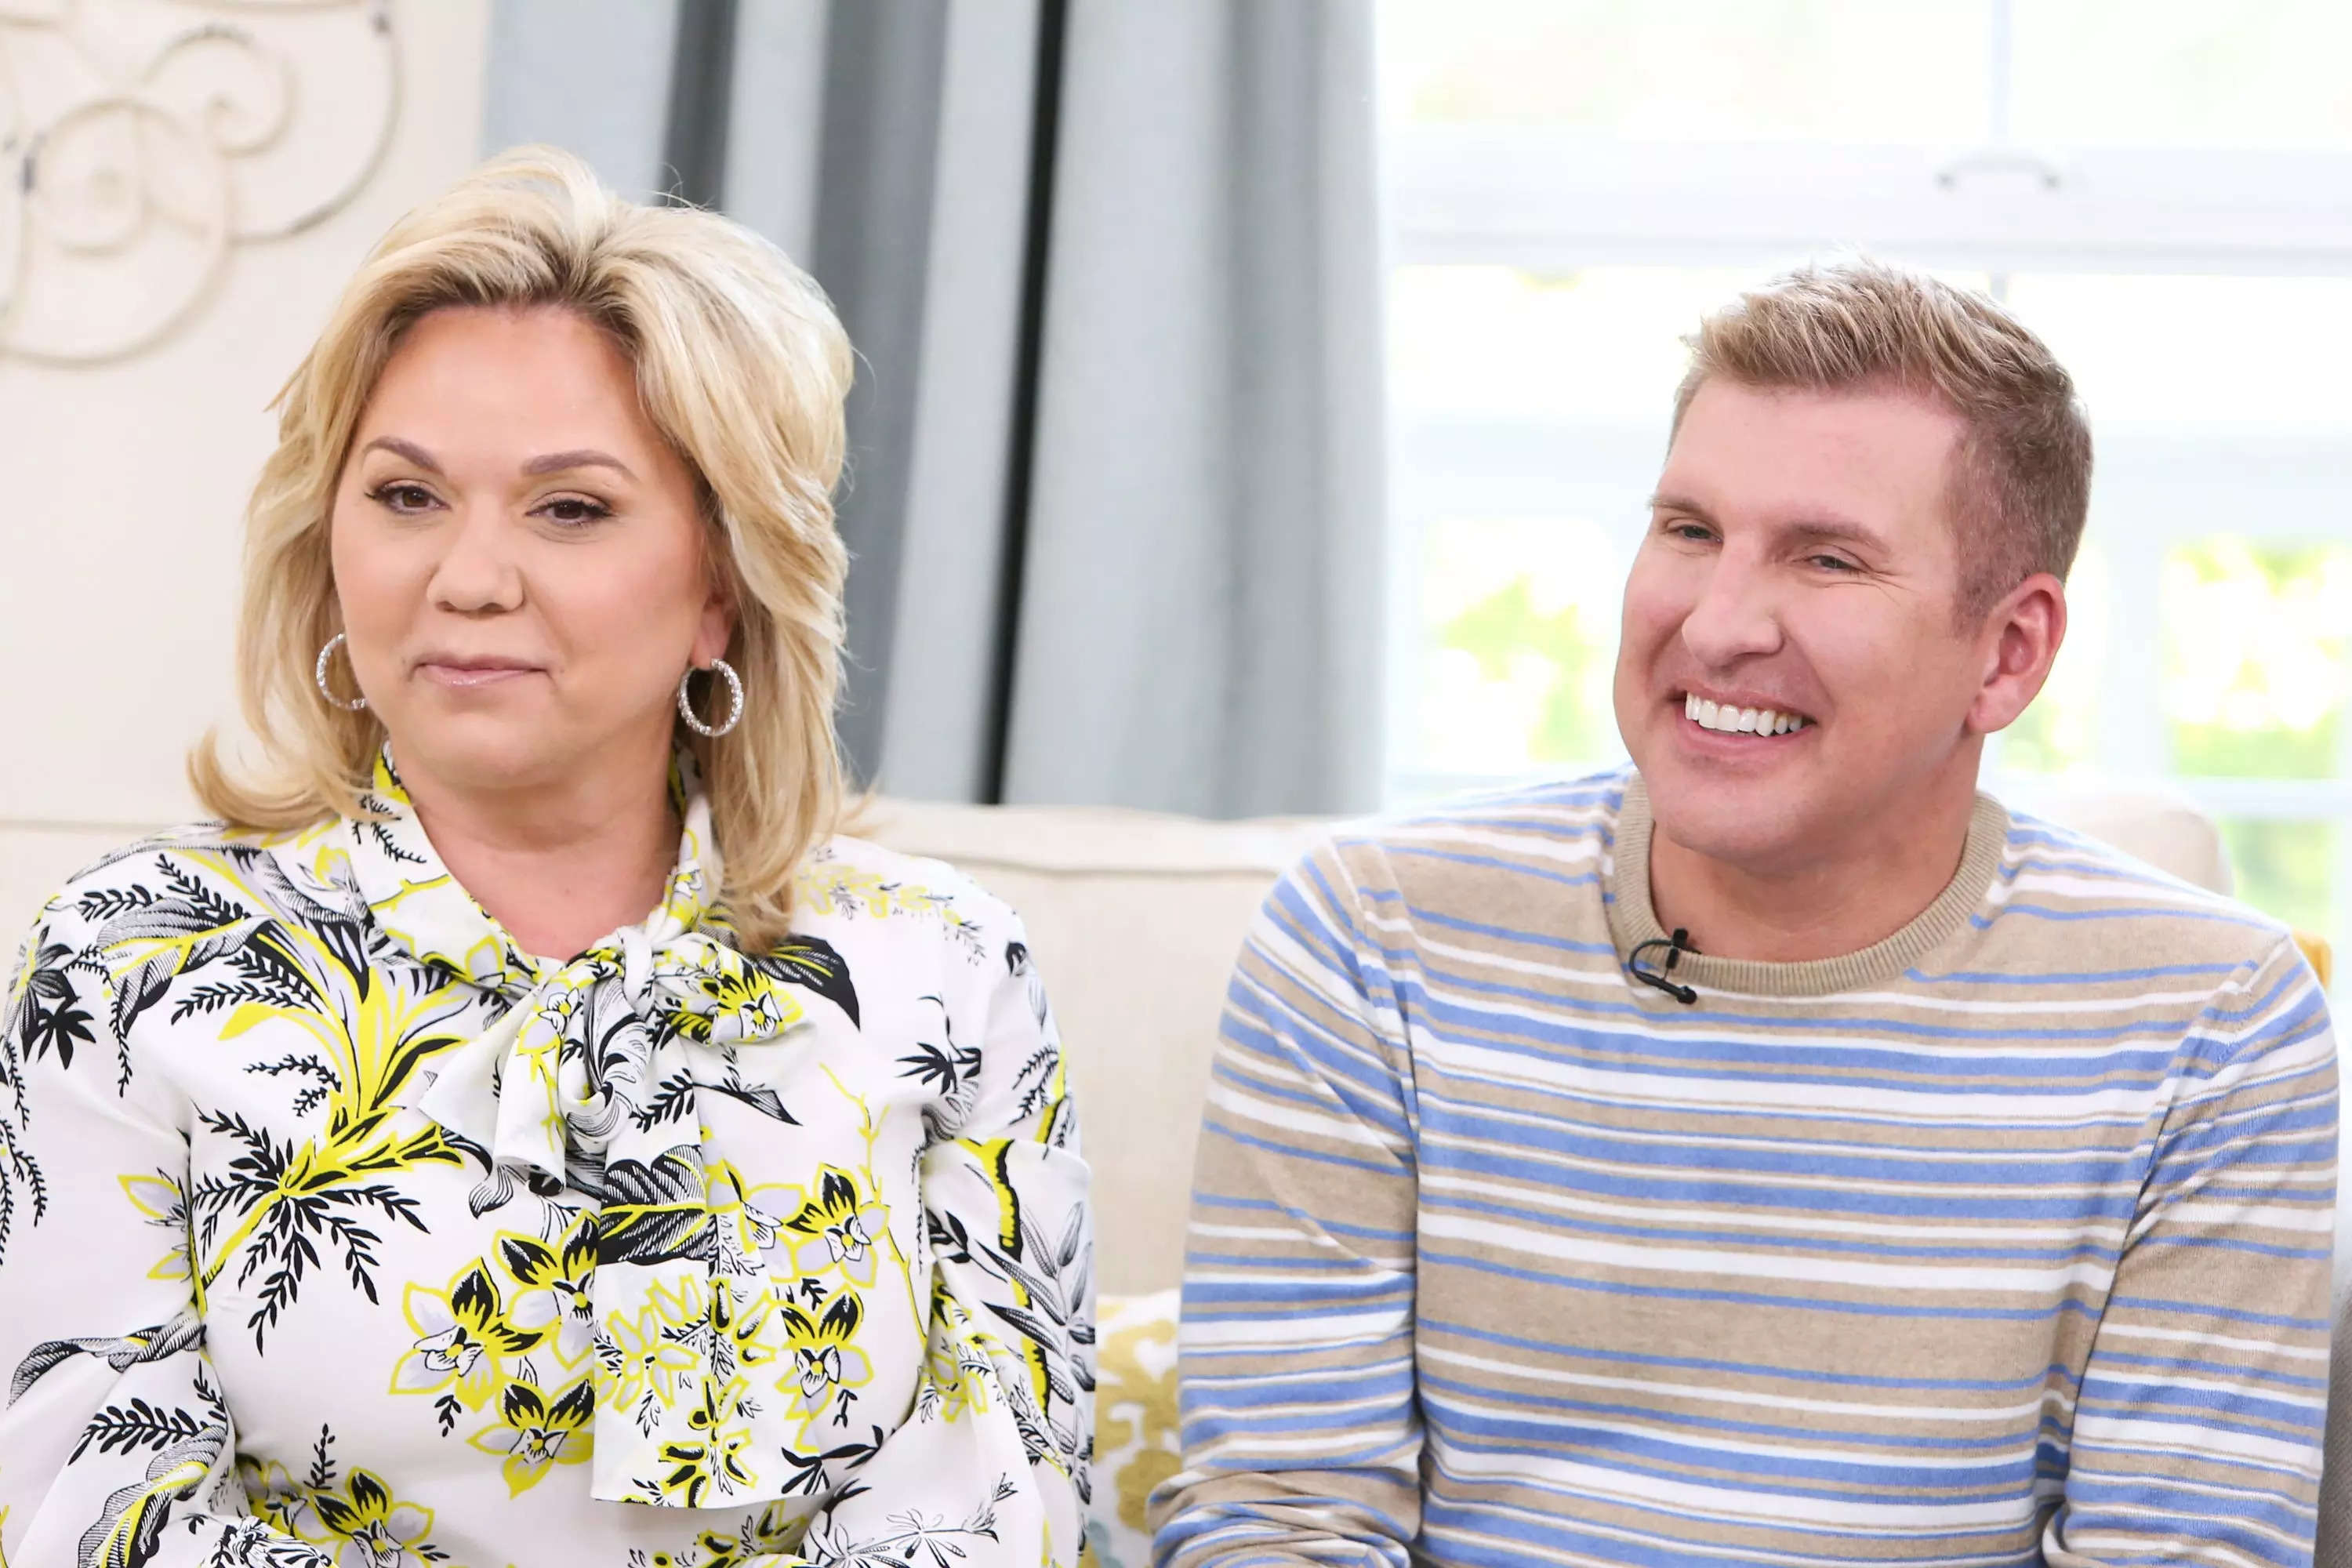 Todd and Julie Chrisley say their 16-year-old son struggles with comments o...